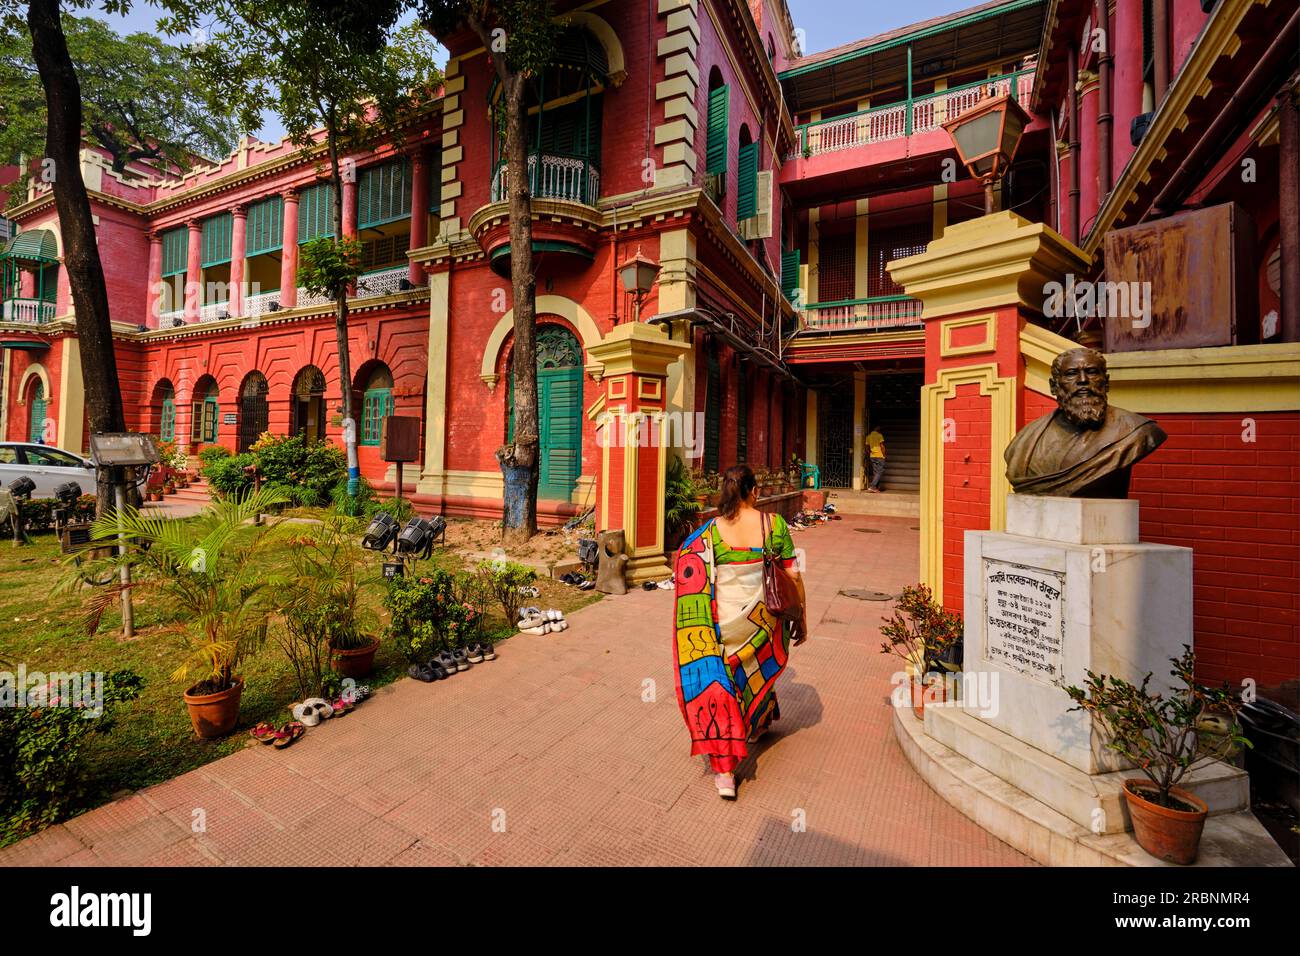 India, West Bengal, Kolkata, Calcutta, Rabindranath Tagore's House, great poet and first Indian Nobel laureate Stock Photo